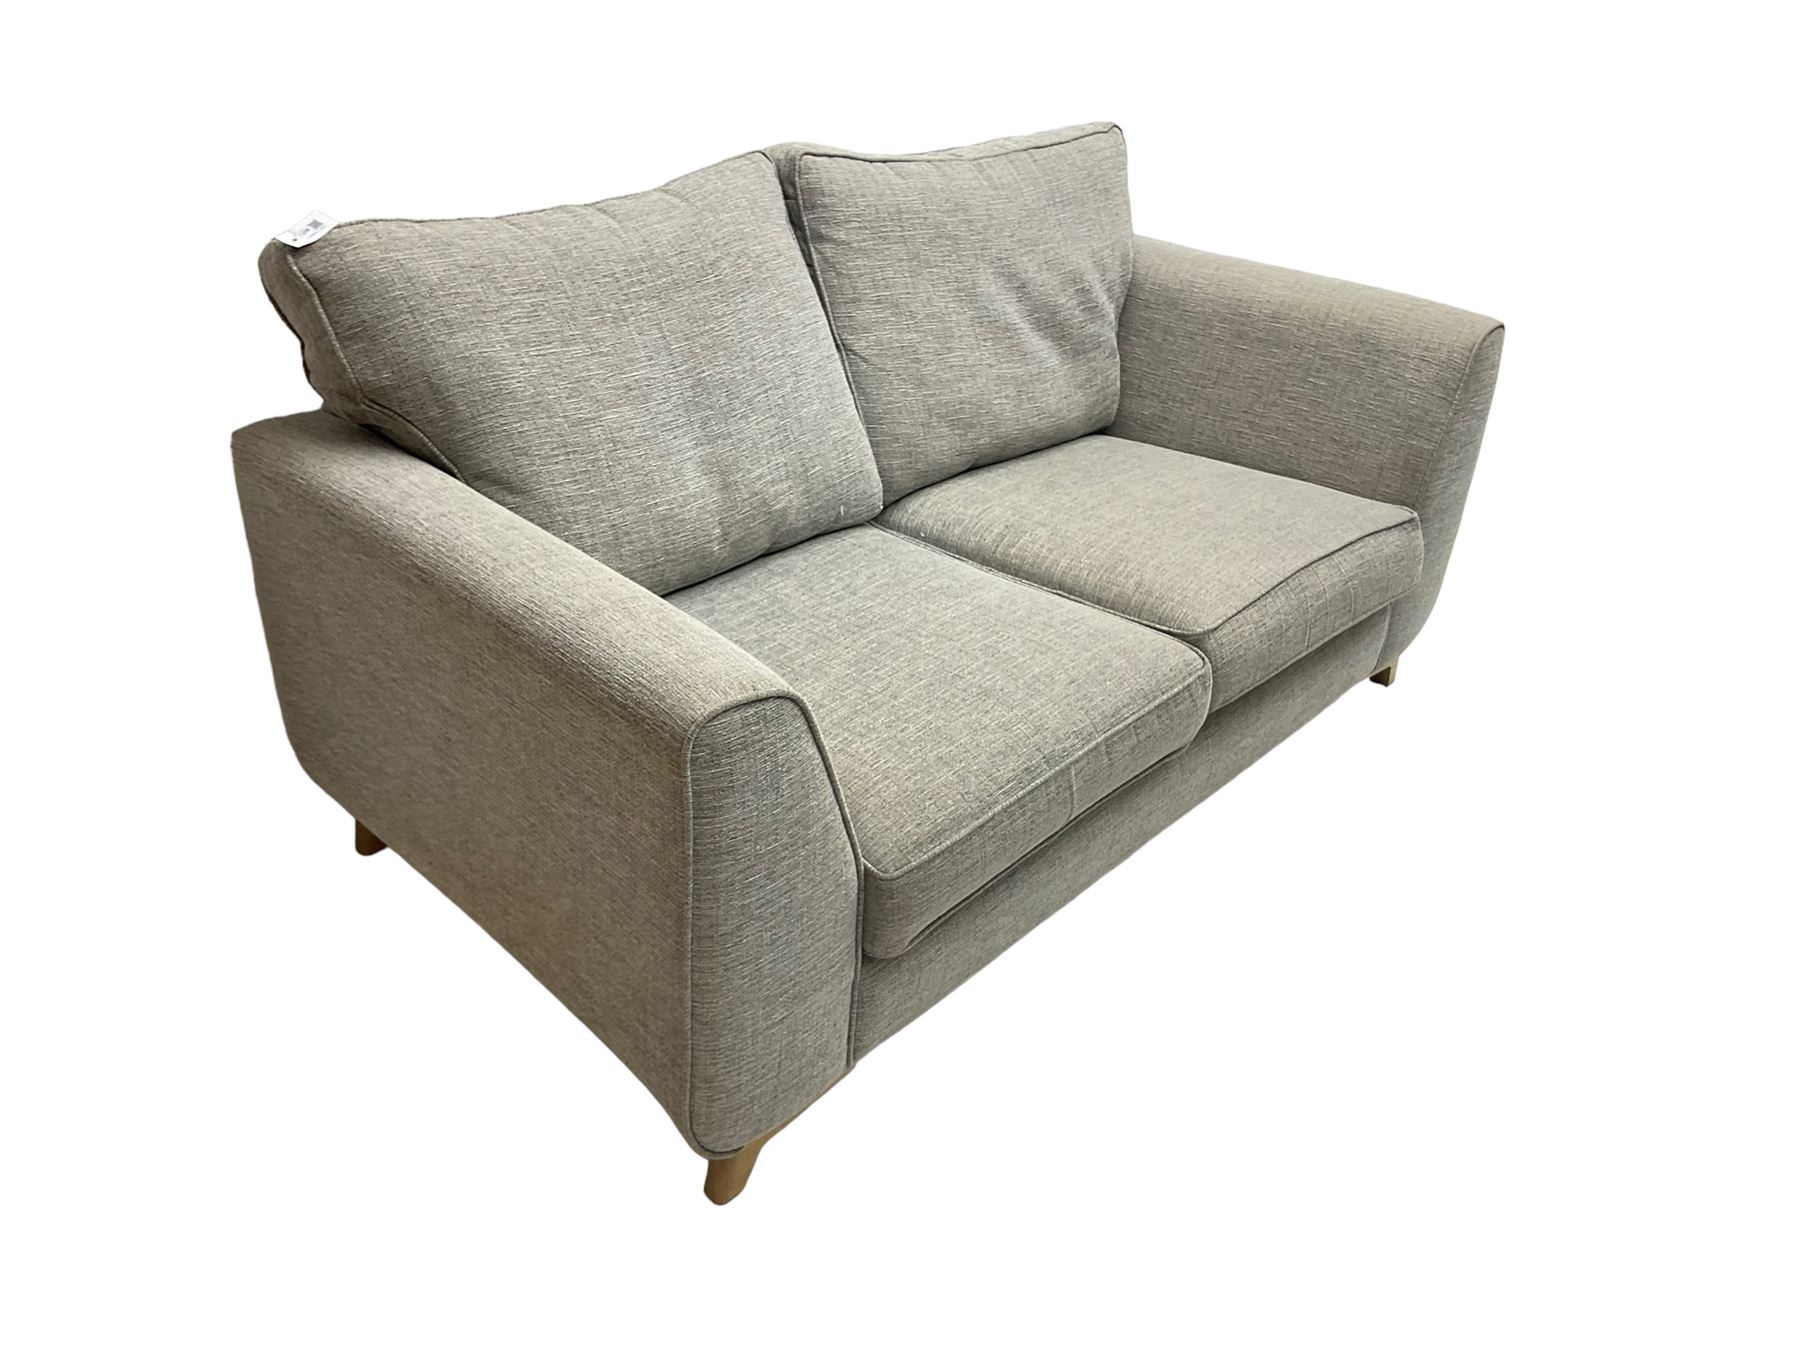 Two seat sofa upholstered in graphite grey fabric - Image 7 of 7